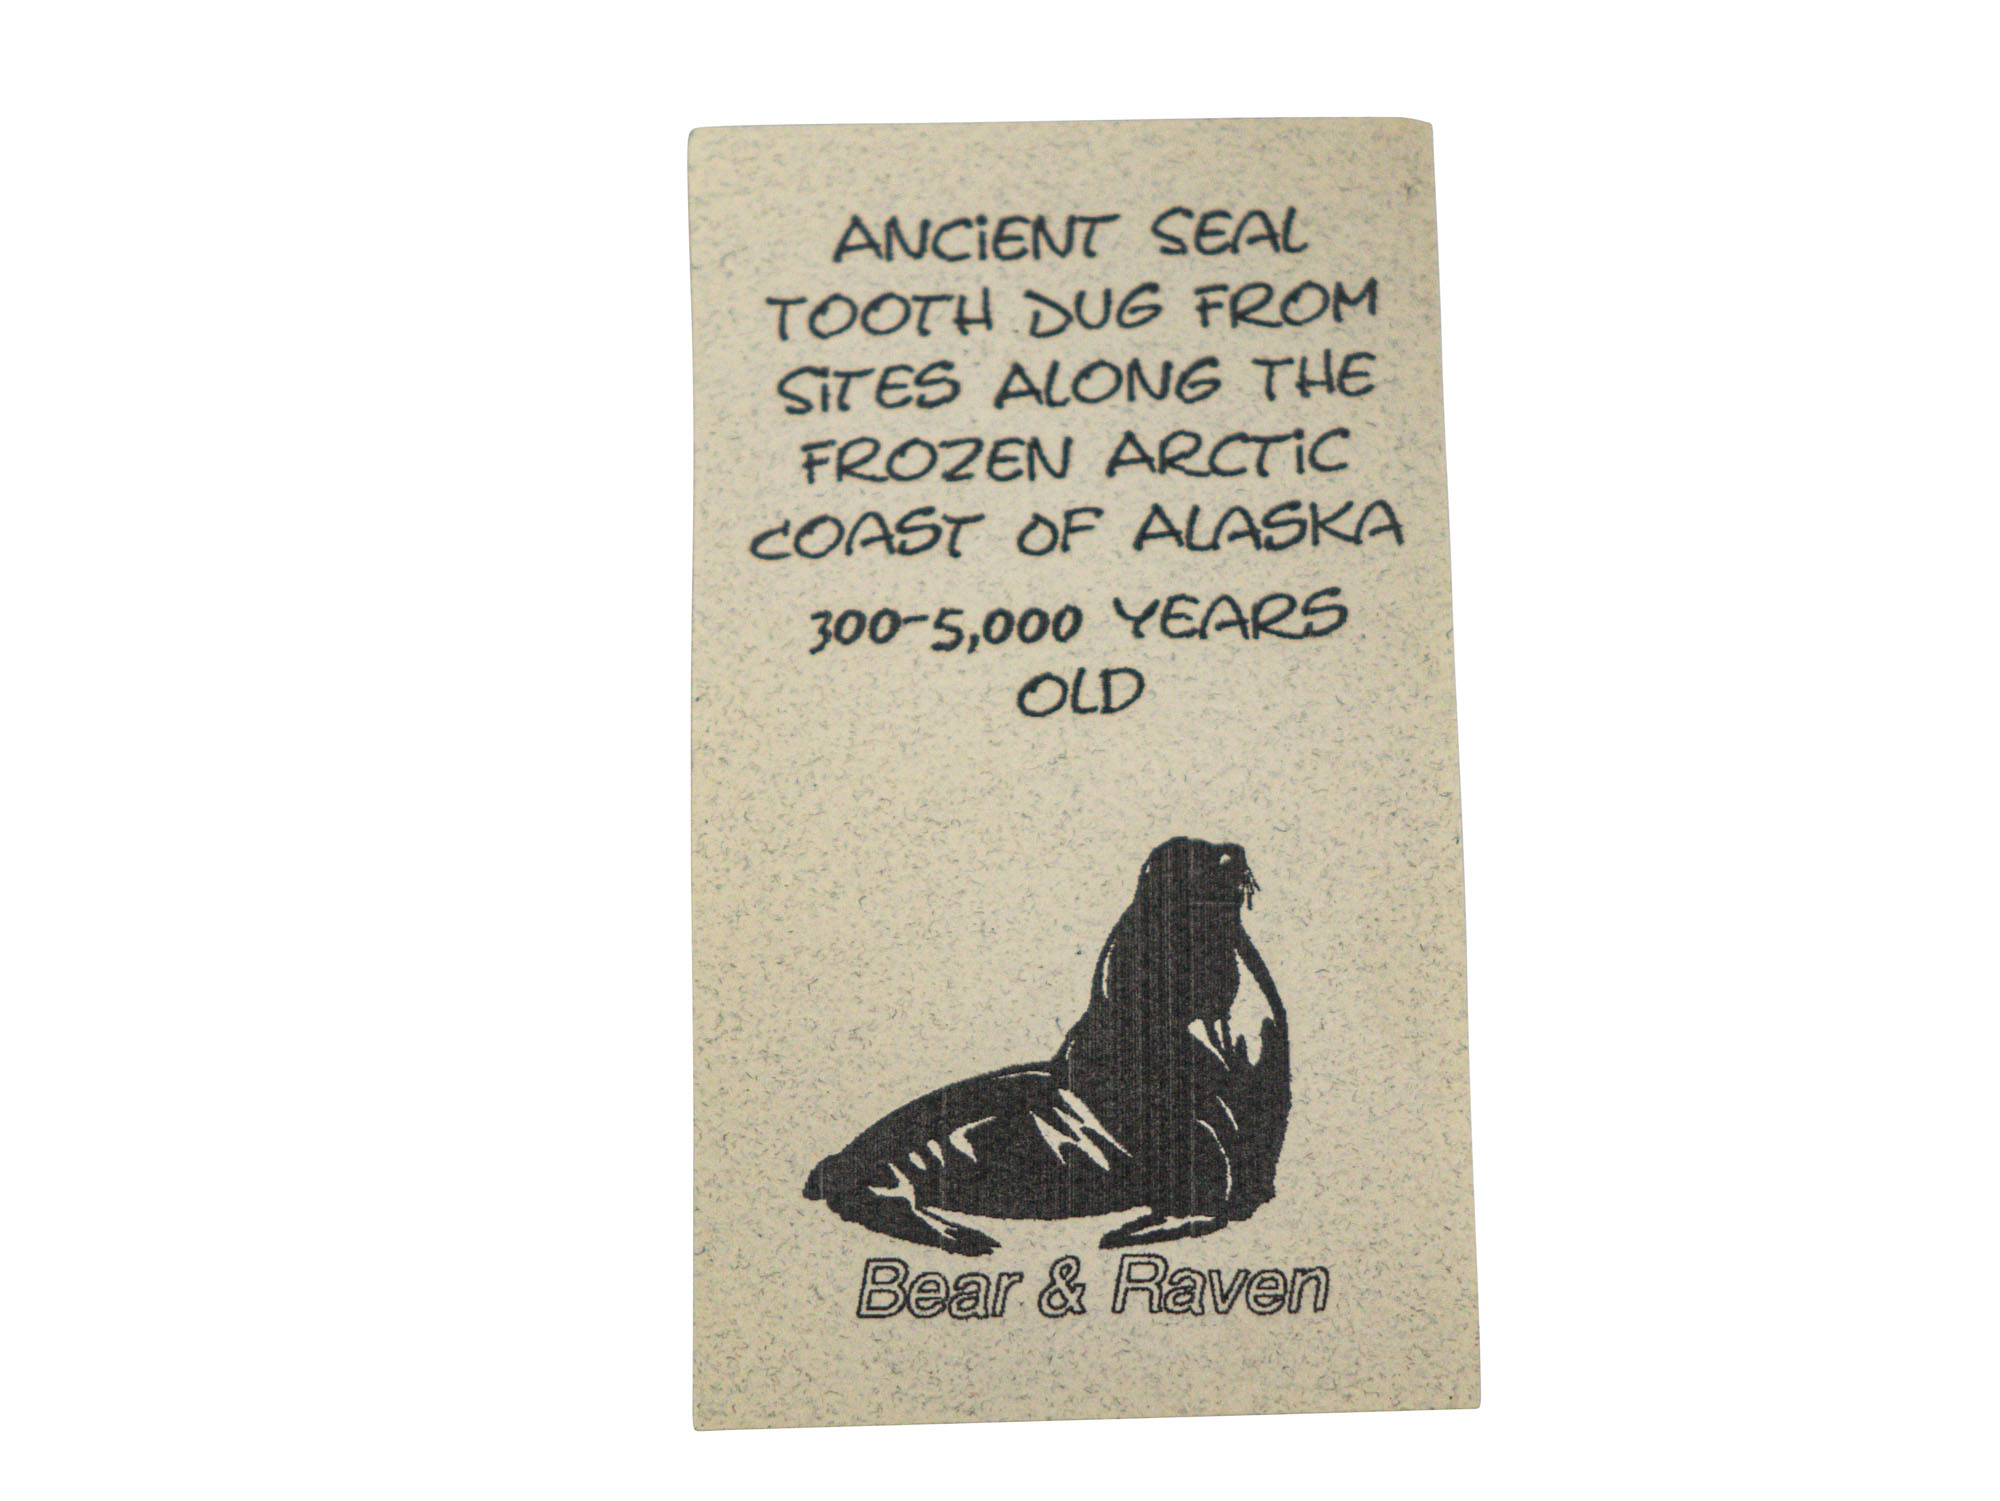 Fossil Seal Tooth Necklace - 373 (N8)